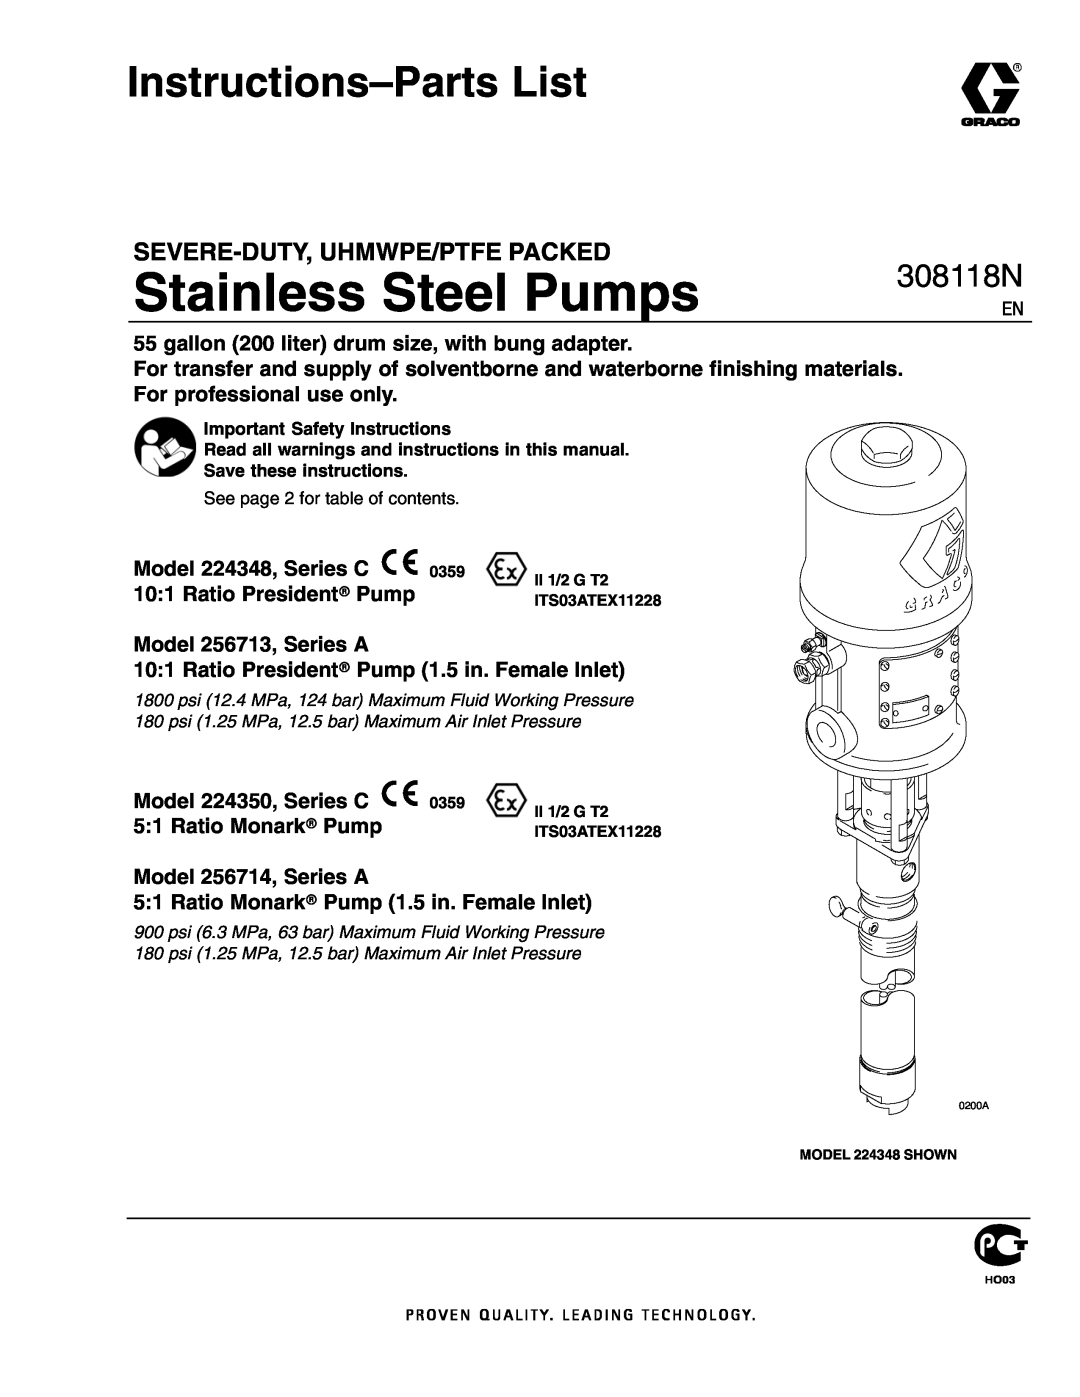 Graco 256714, 256713, 223540, 224348 important safety instructions Instructions-PartsList, Stainless Steel Pumps, 308118N 